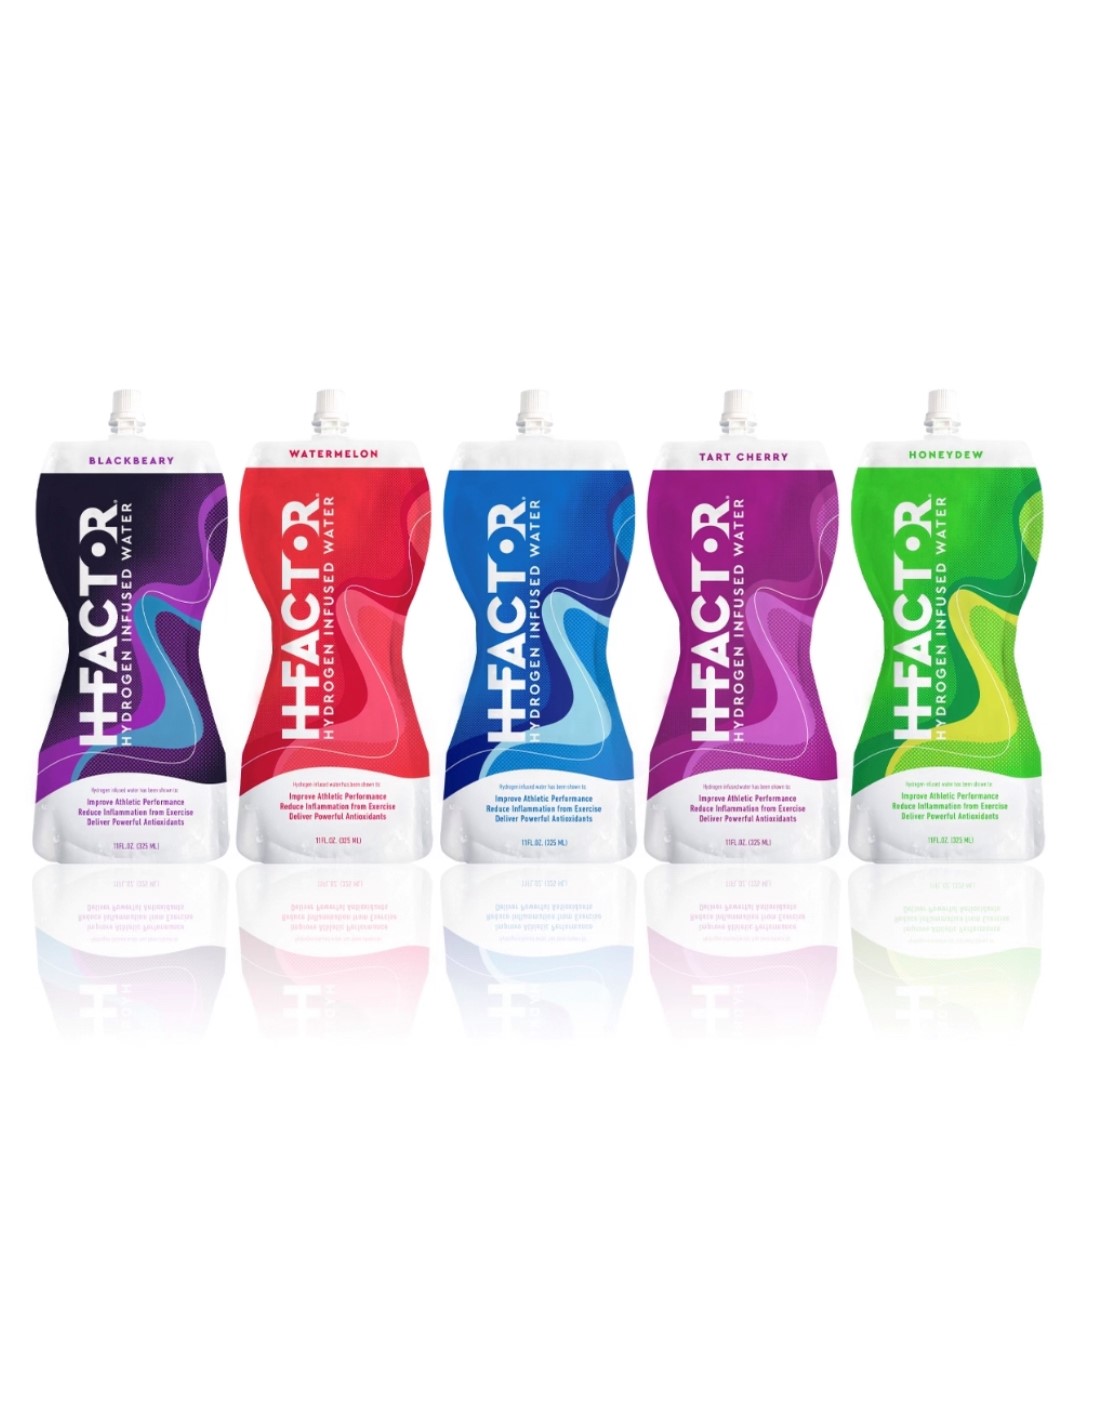 Colorful redesign of eco-conscious, recyclable packaging